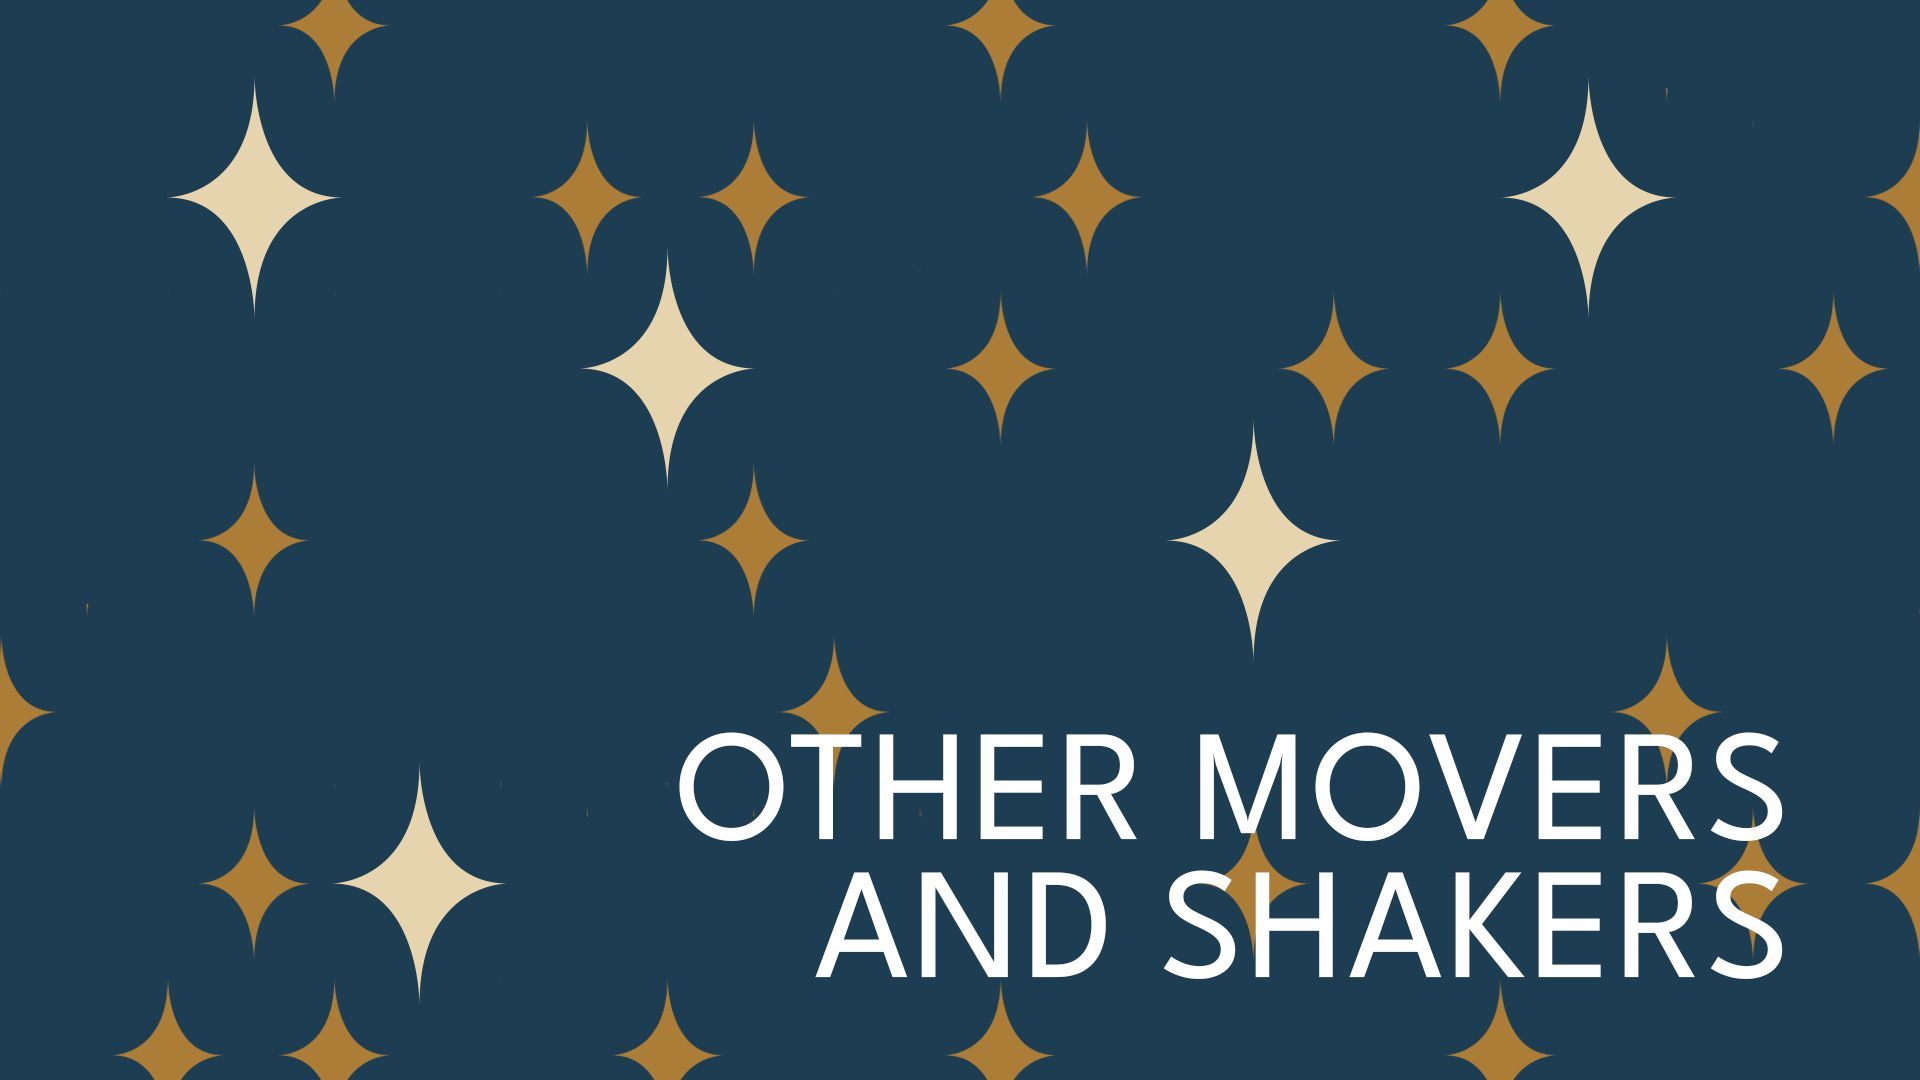 Illustration of stars with the words "Other Movers and Shakers."